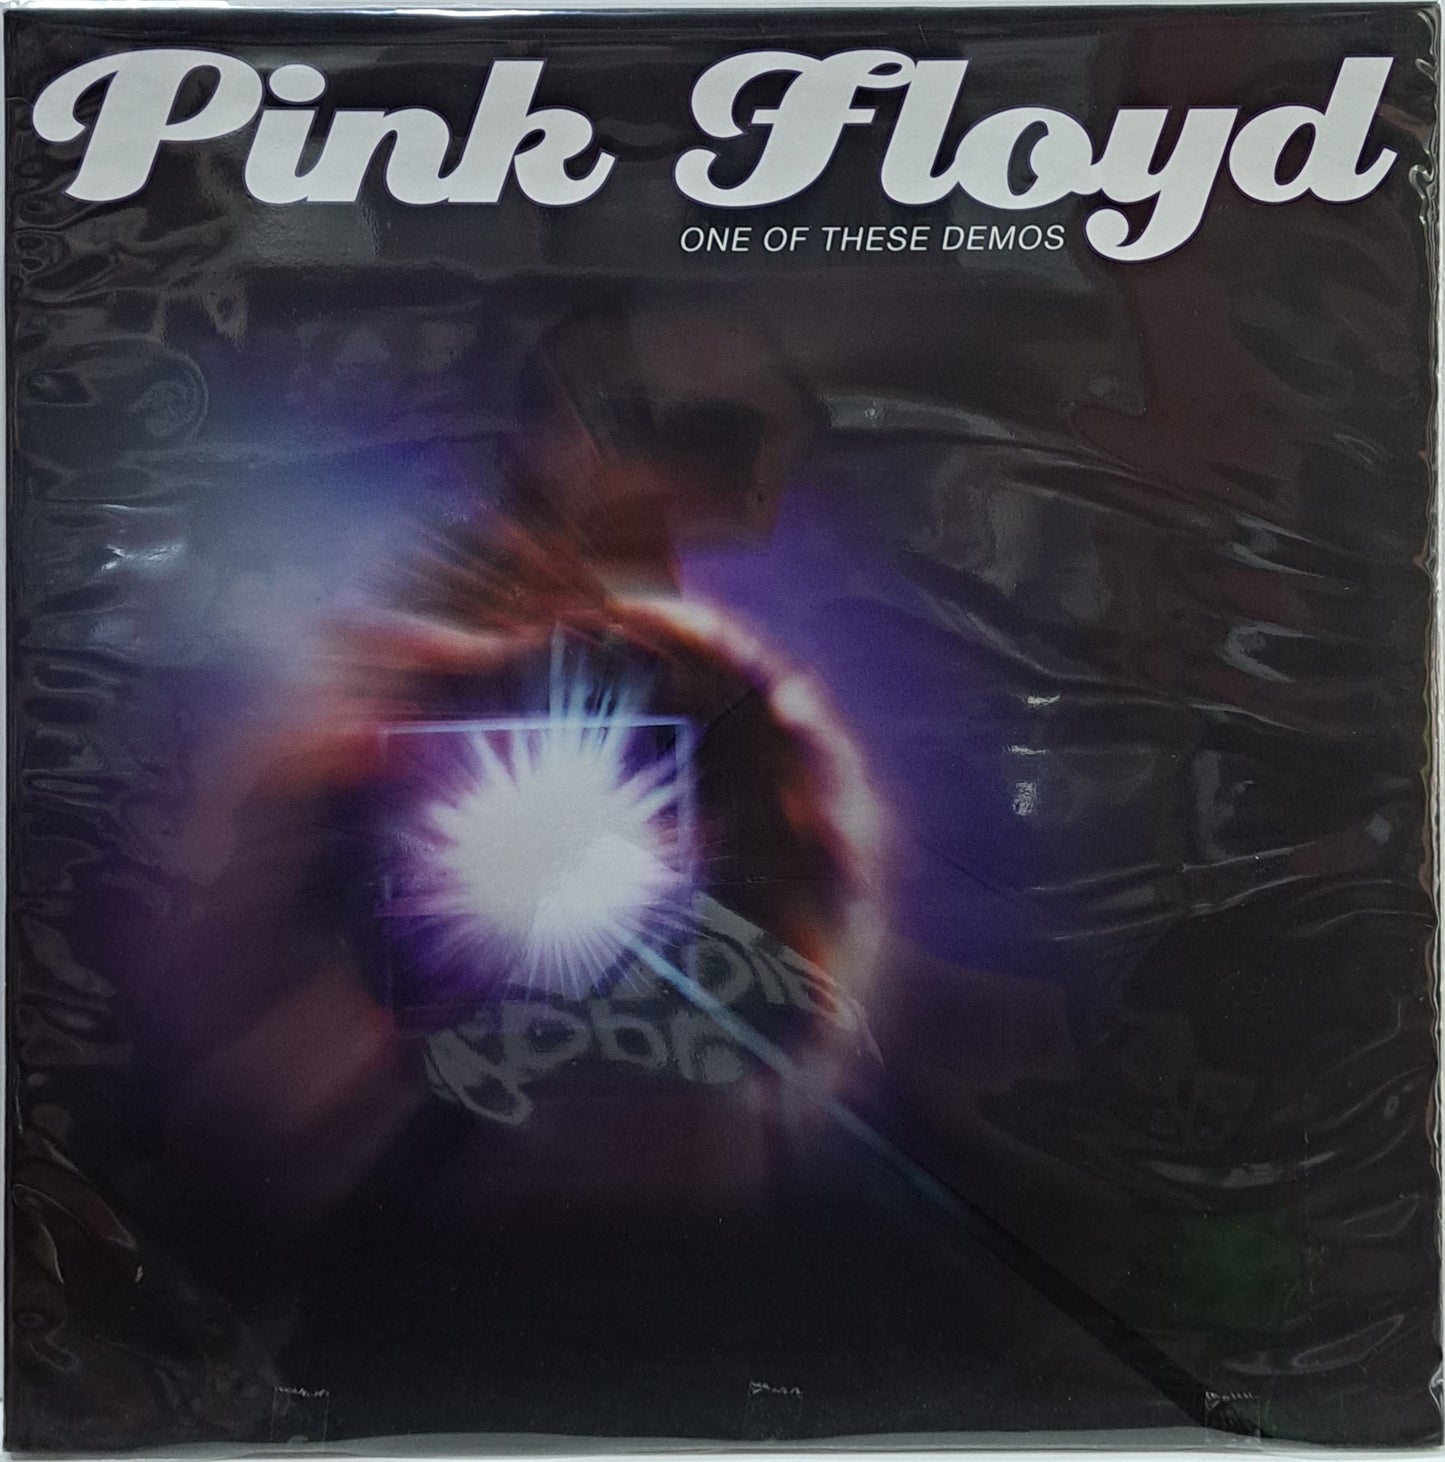 PINK FLOYD - ONE OF THESE DEMOS  LP